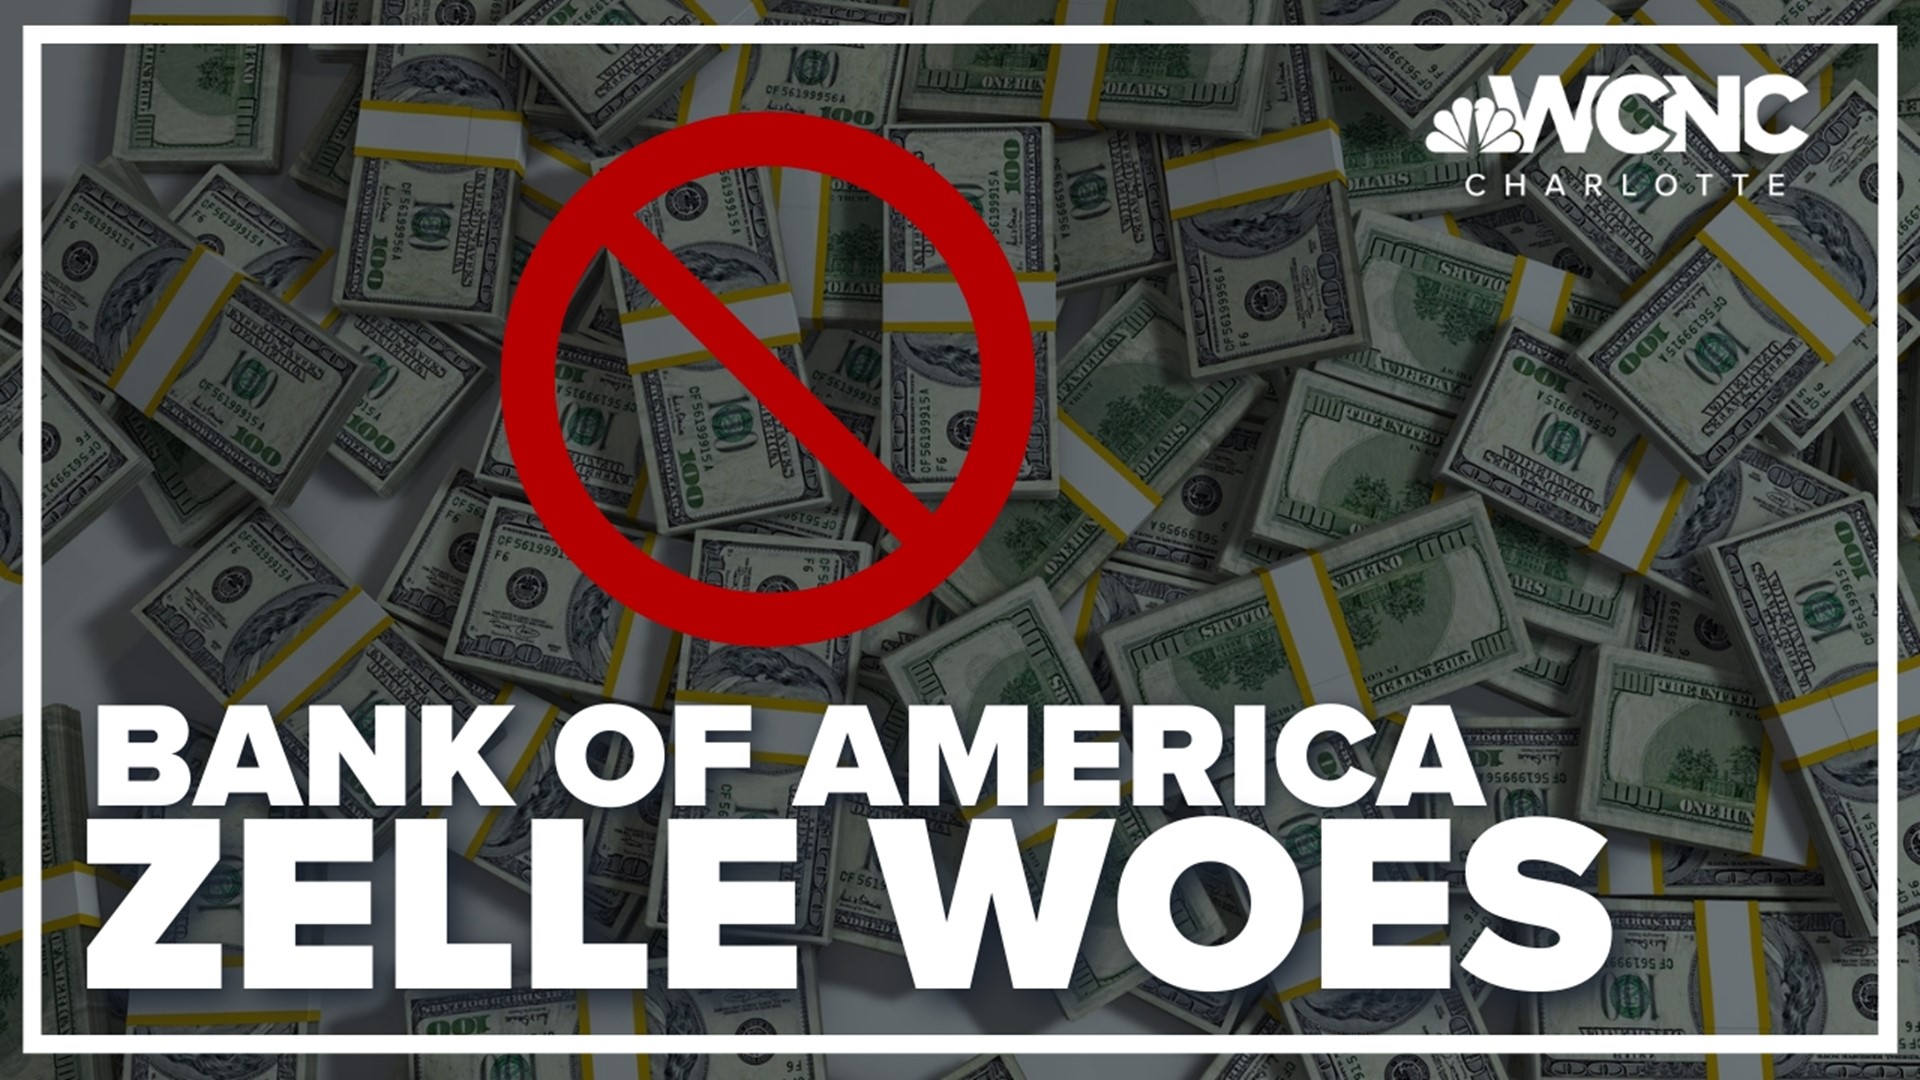 A consumer alert for Bank of America customers: your Zelle money may be delayed.